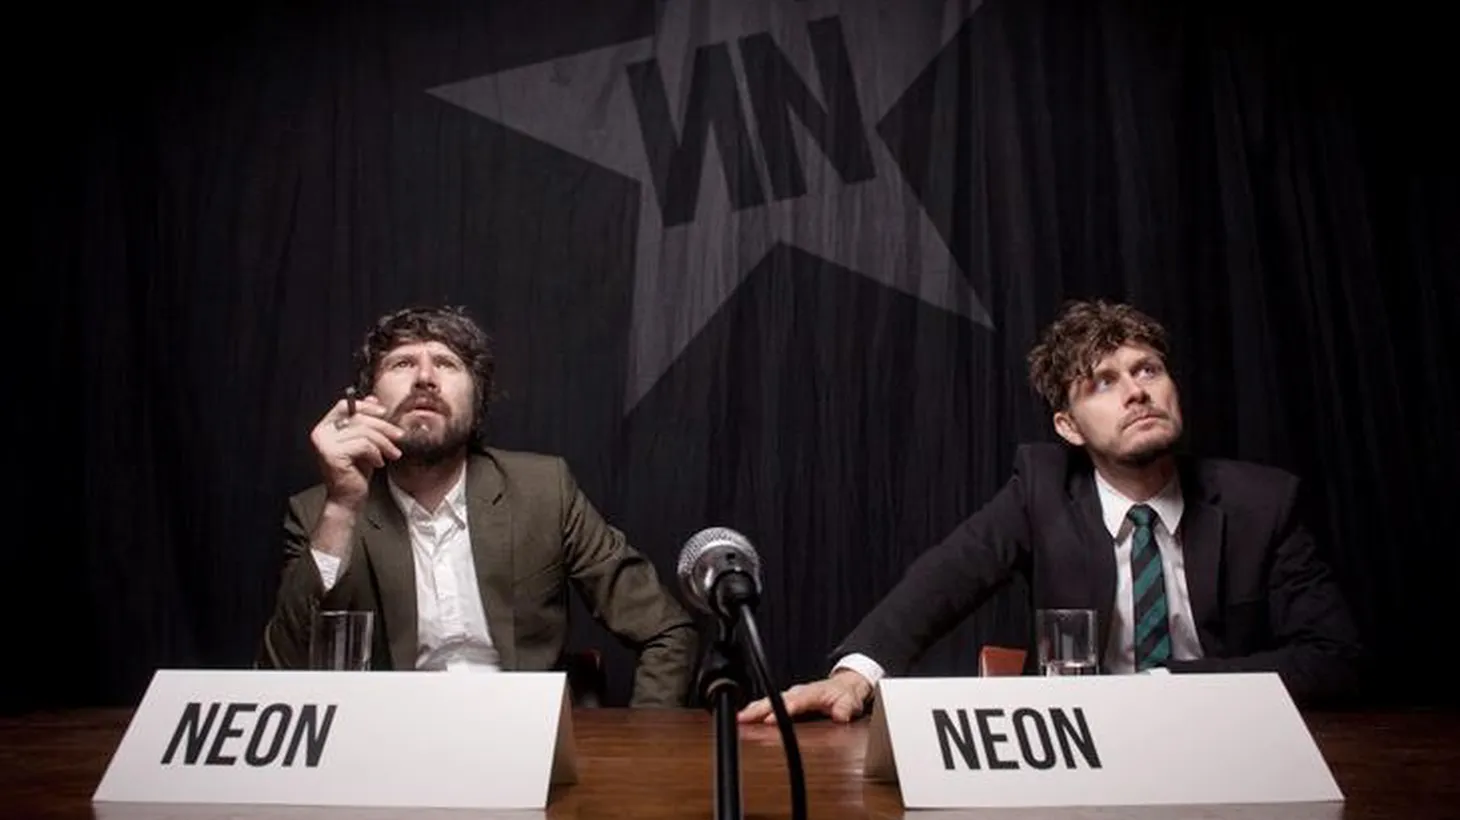 Producer Boom Bip and Super Furry Animals frontman Gruff Rhys join forces for the synth-pop project Neon Neon during their US radio debut.